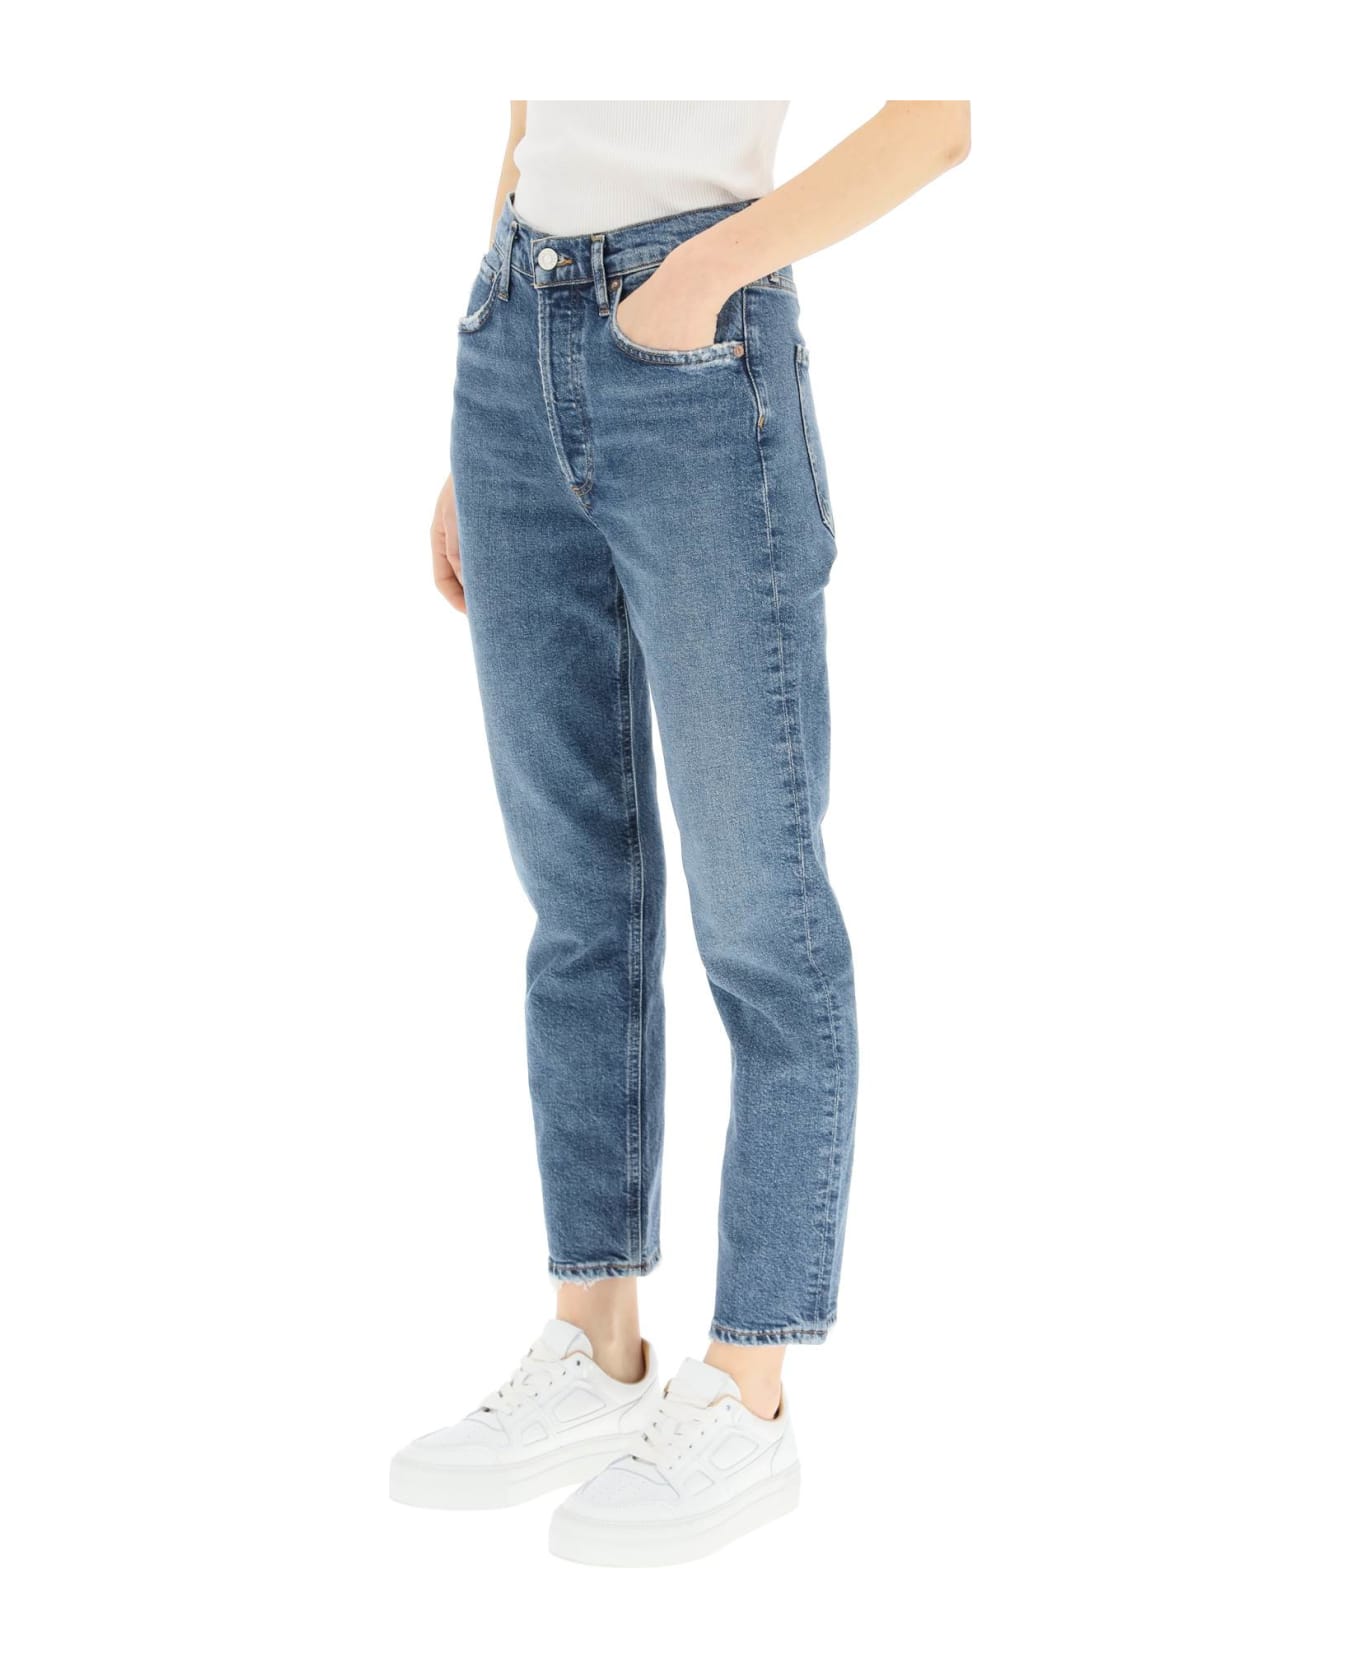 AGOLDE 'riley' Cropped Jeans - Slnce Silence デニム